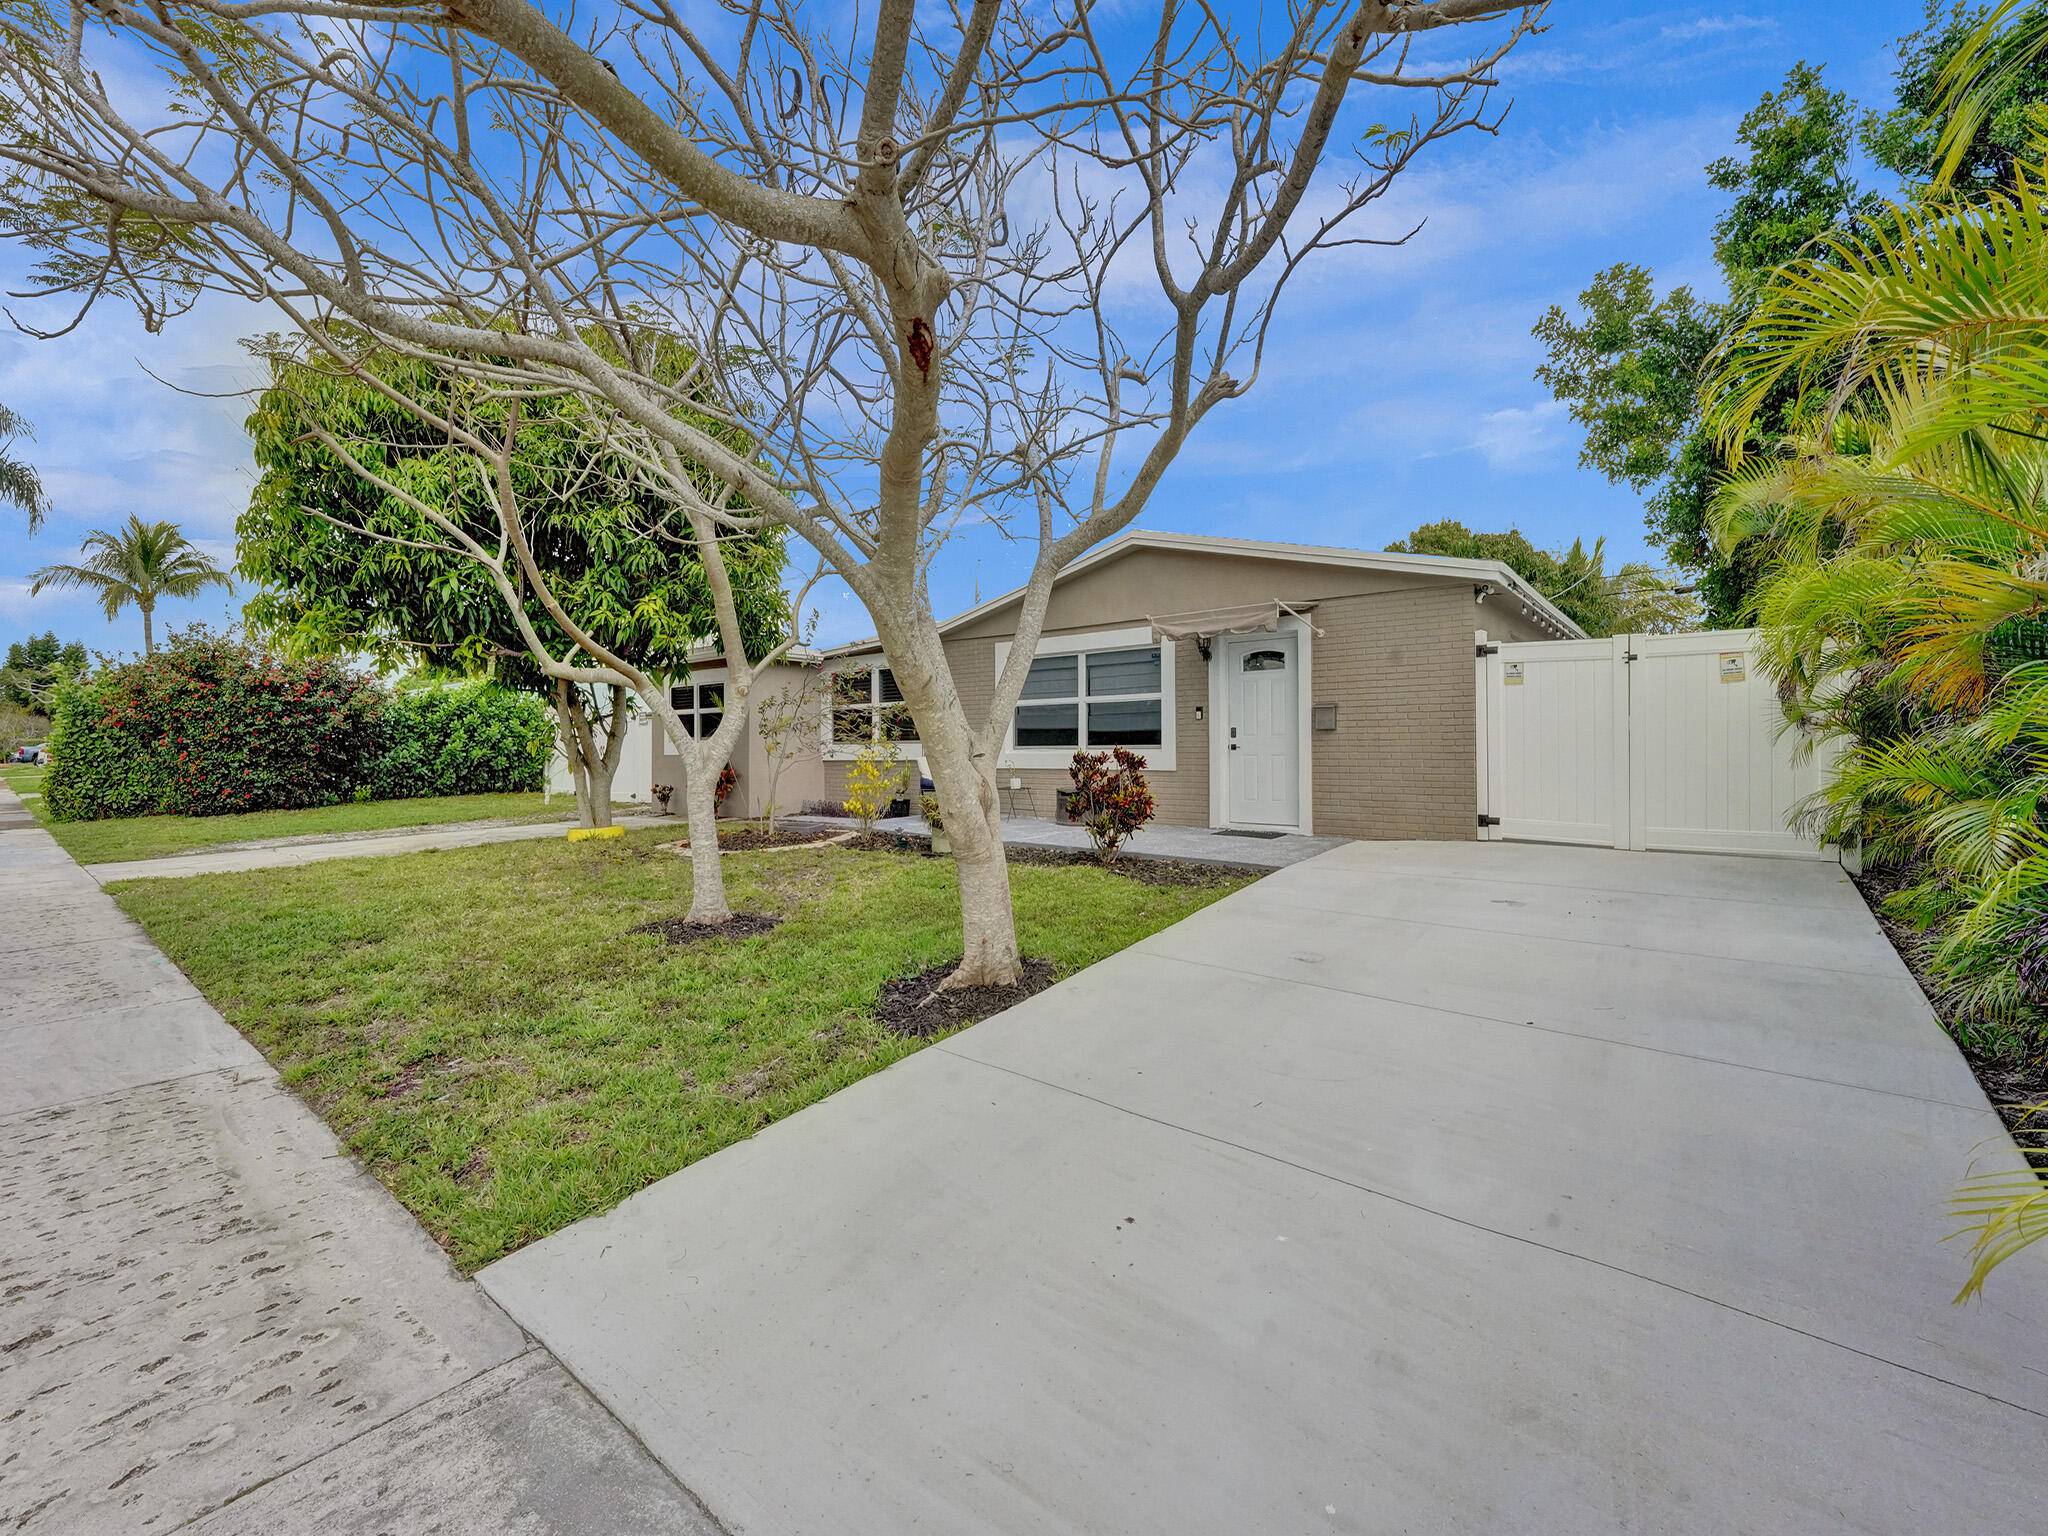 Come Visit this charming home situated in the heart of North Palm Beach !